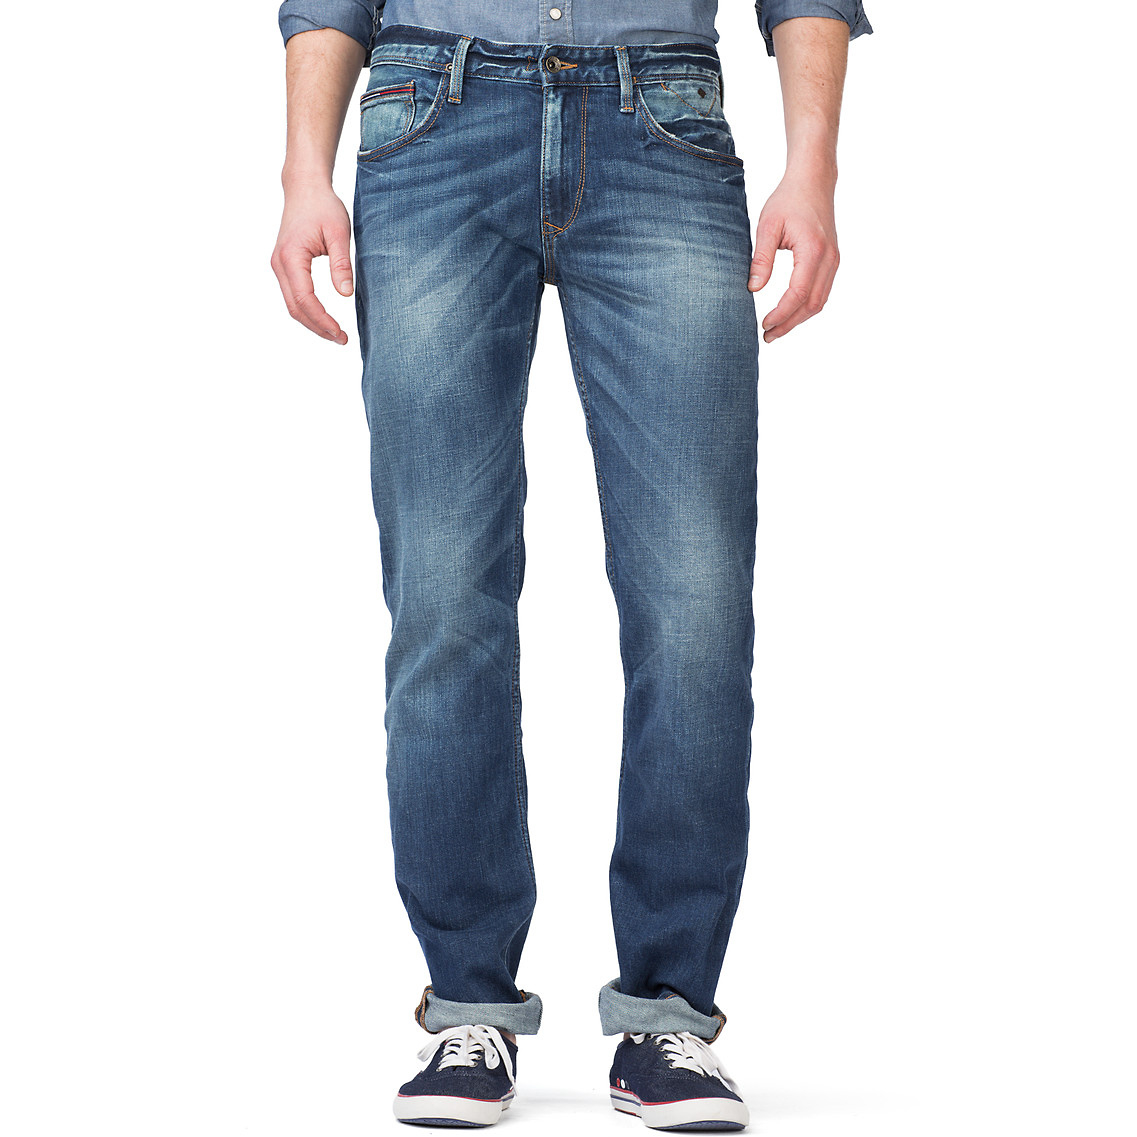 Tommy Hilfiger Ryan Straight Leg Jeans in Blue for Men - Lyst